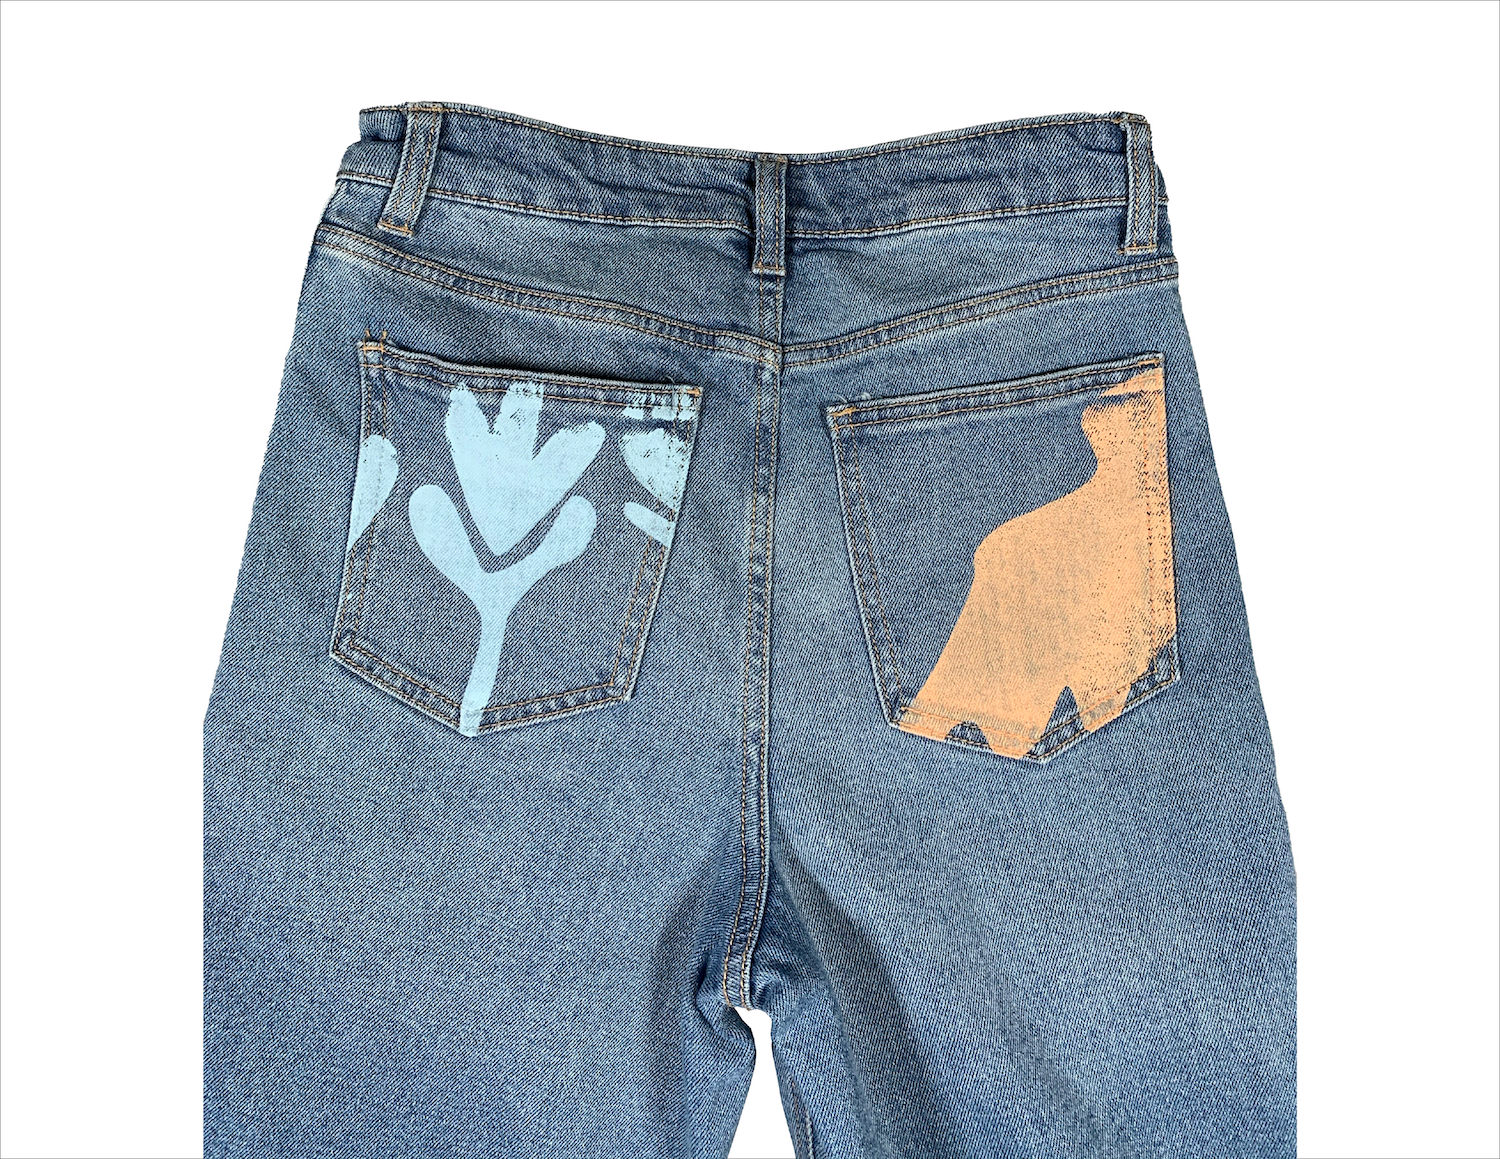 image of back pockets of a pair of jeans. left pocket has a print of a light blue tulip, while right pocket has a print of an orange blob shape.